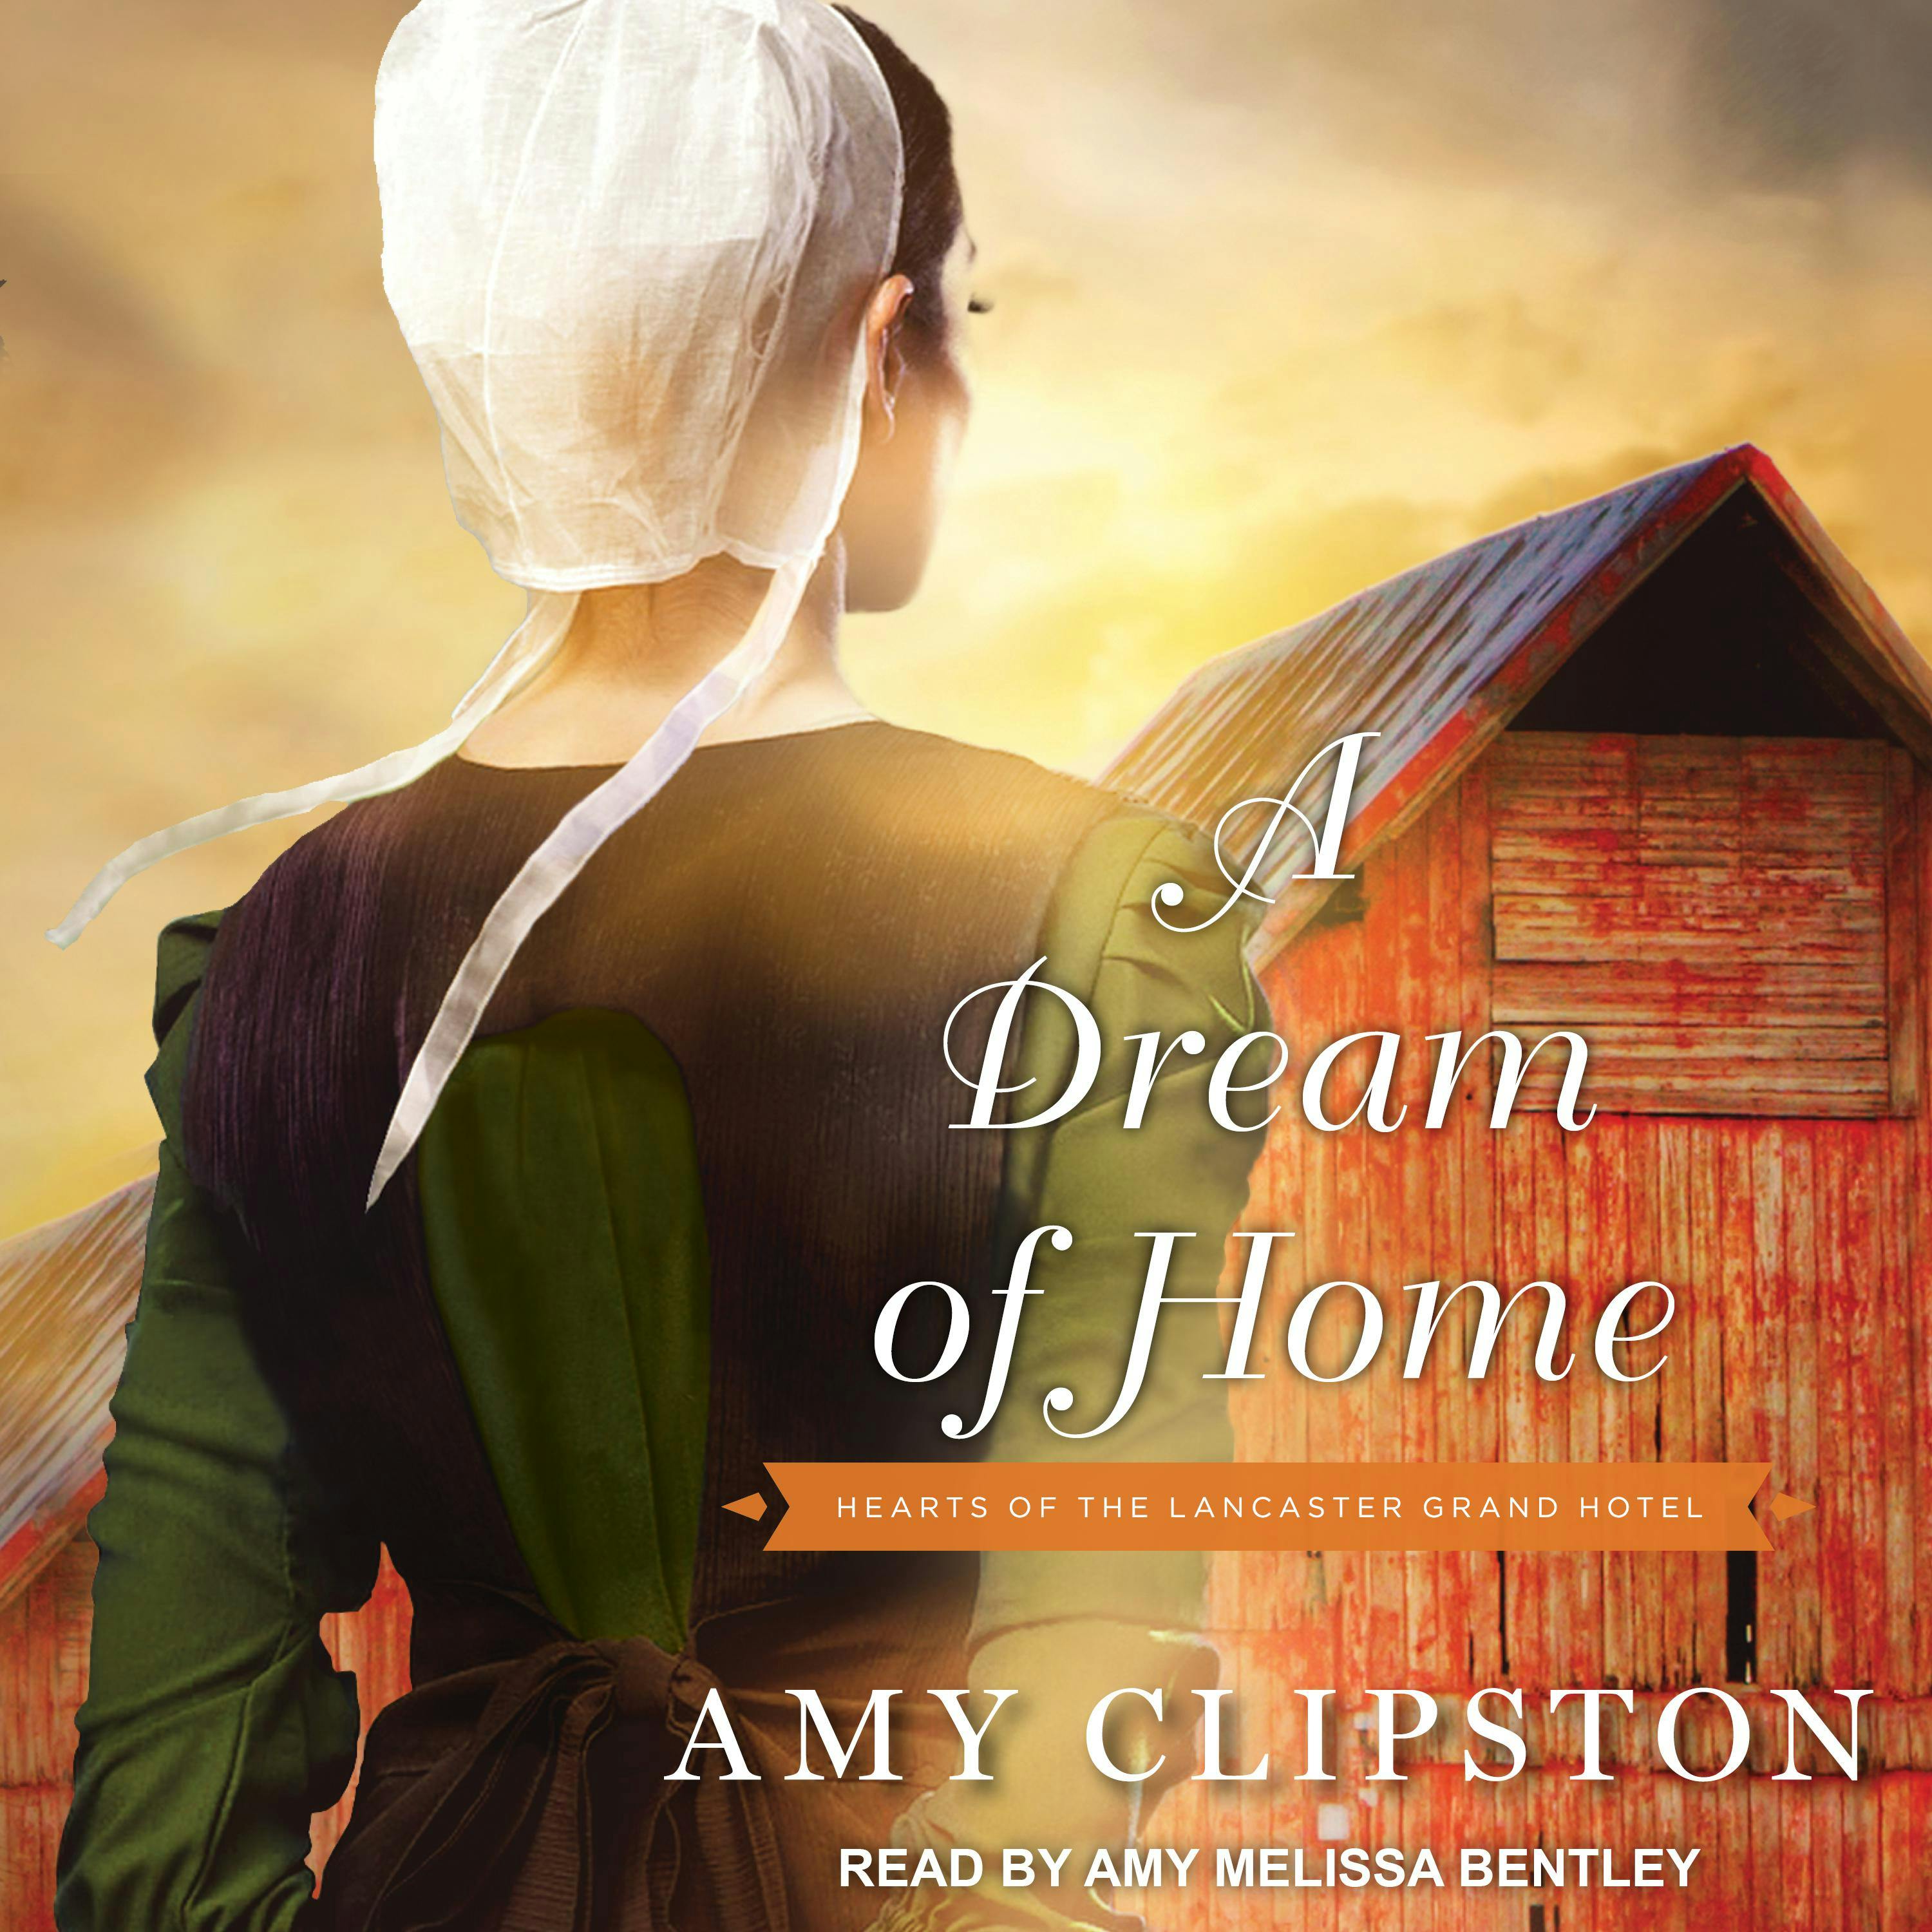 A Dream of Home: Hearts of the Lancaster Grand Hotel - Amy Clipston